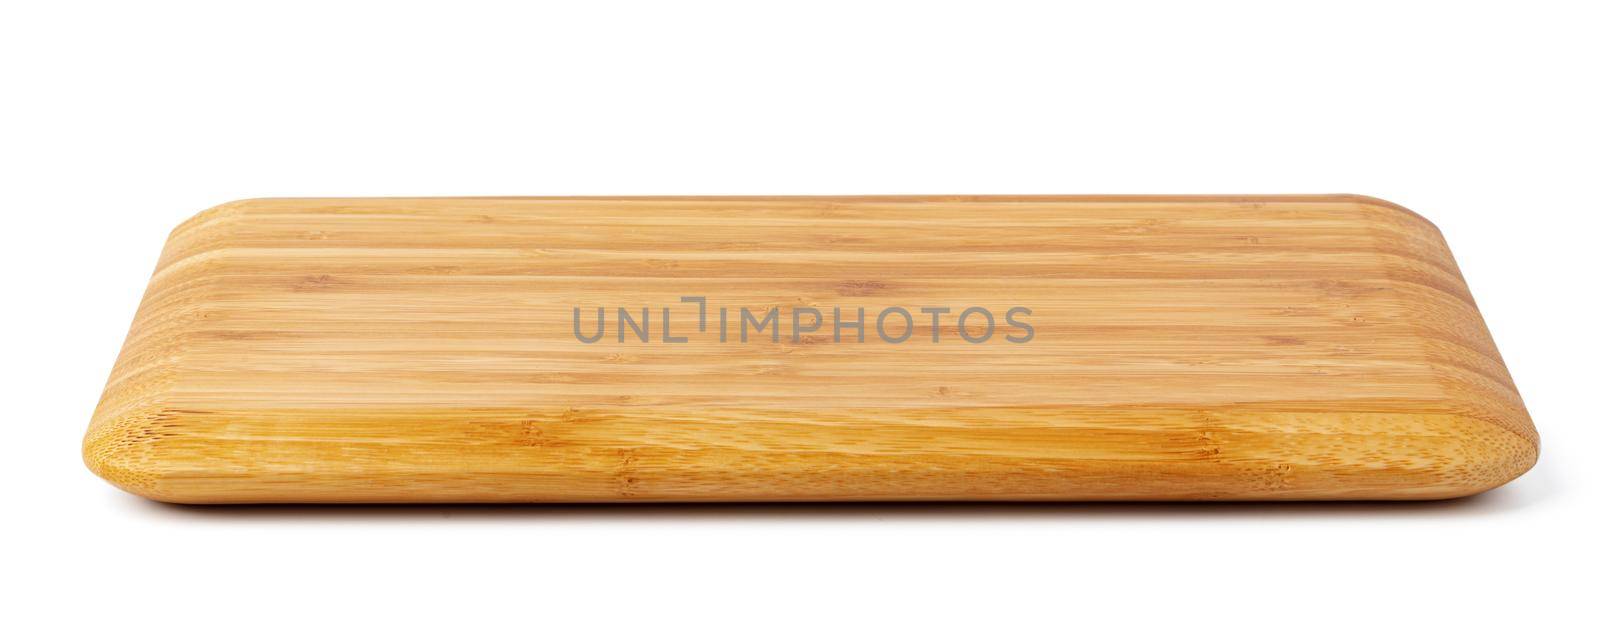 Wooden board isolated on white background, close up by Fabrikasimf